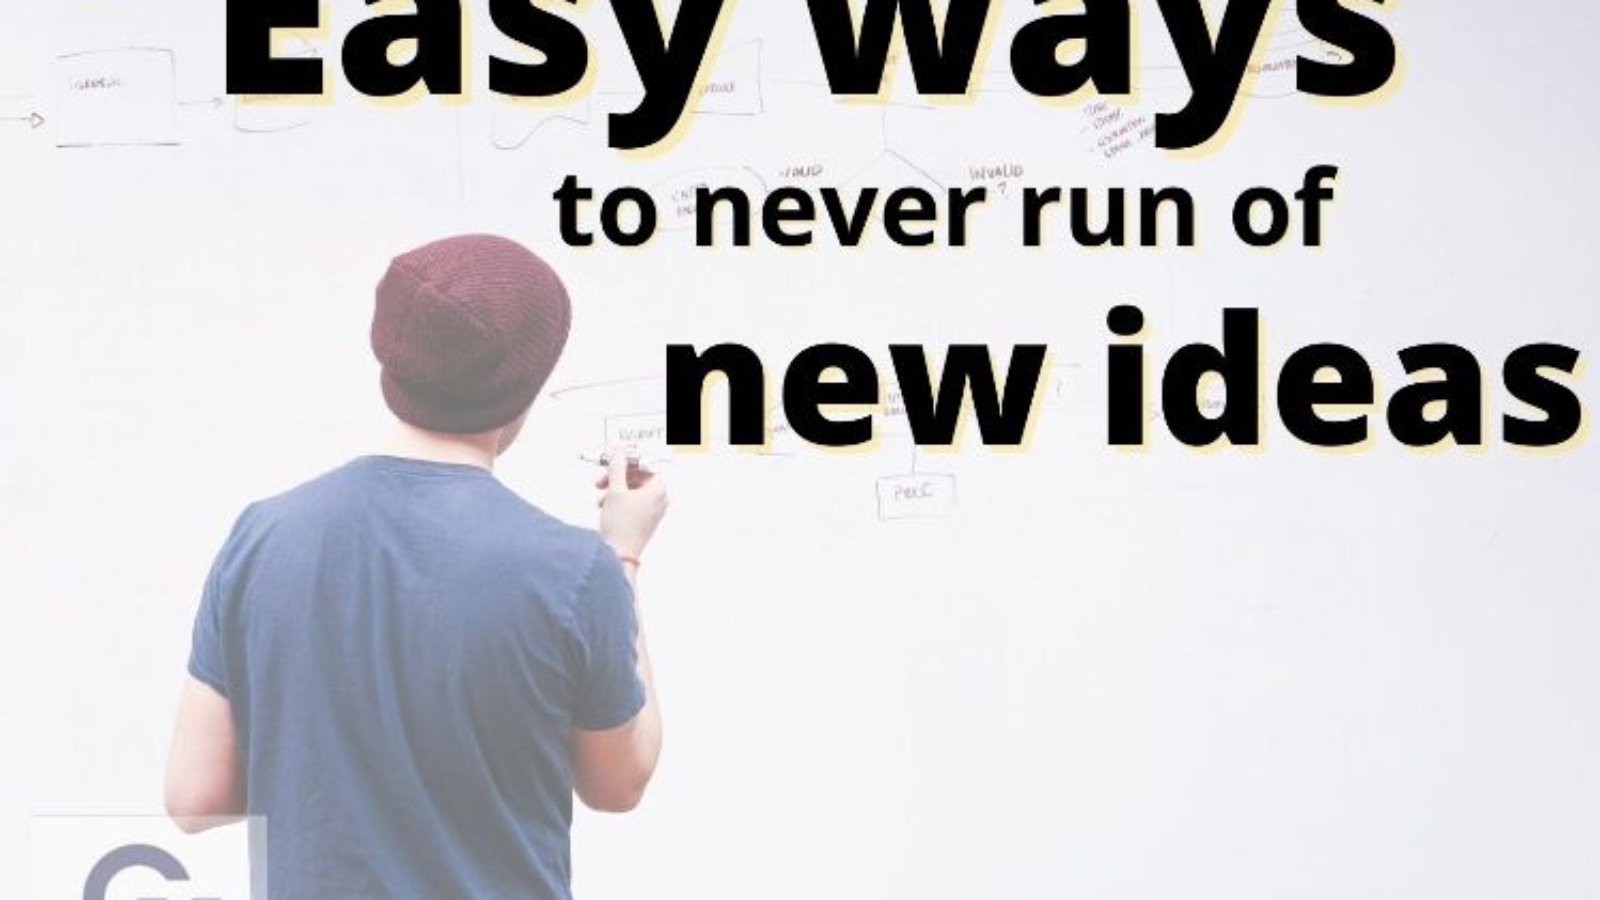 5 easy ways to never run out of new ideas cademix article Lindah